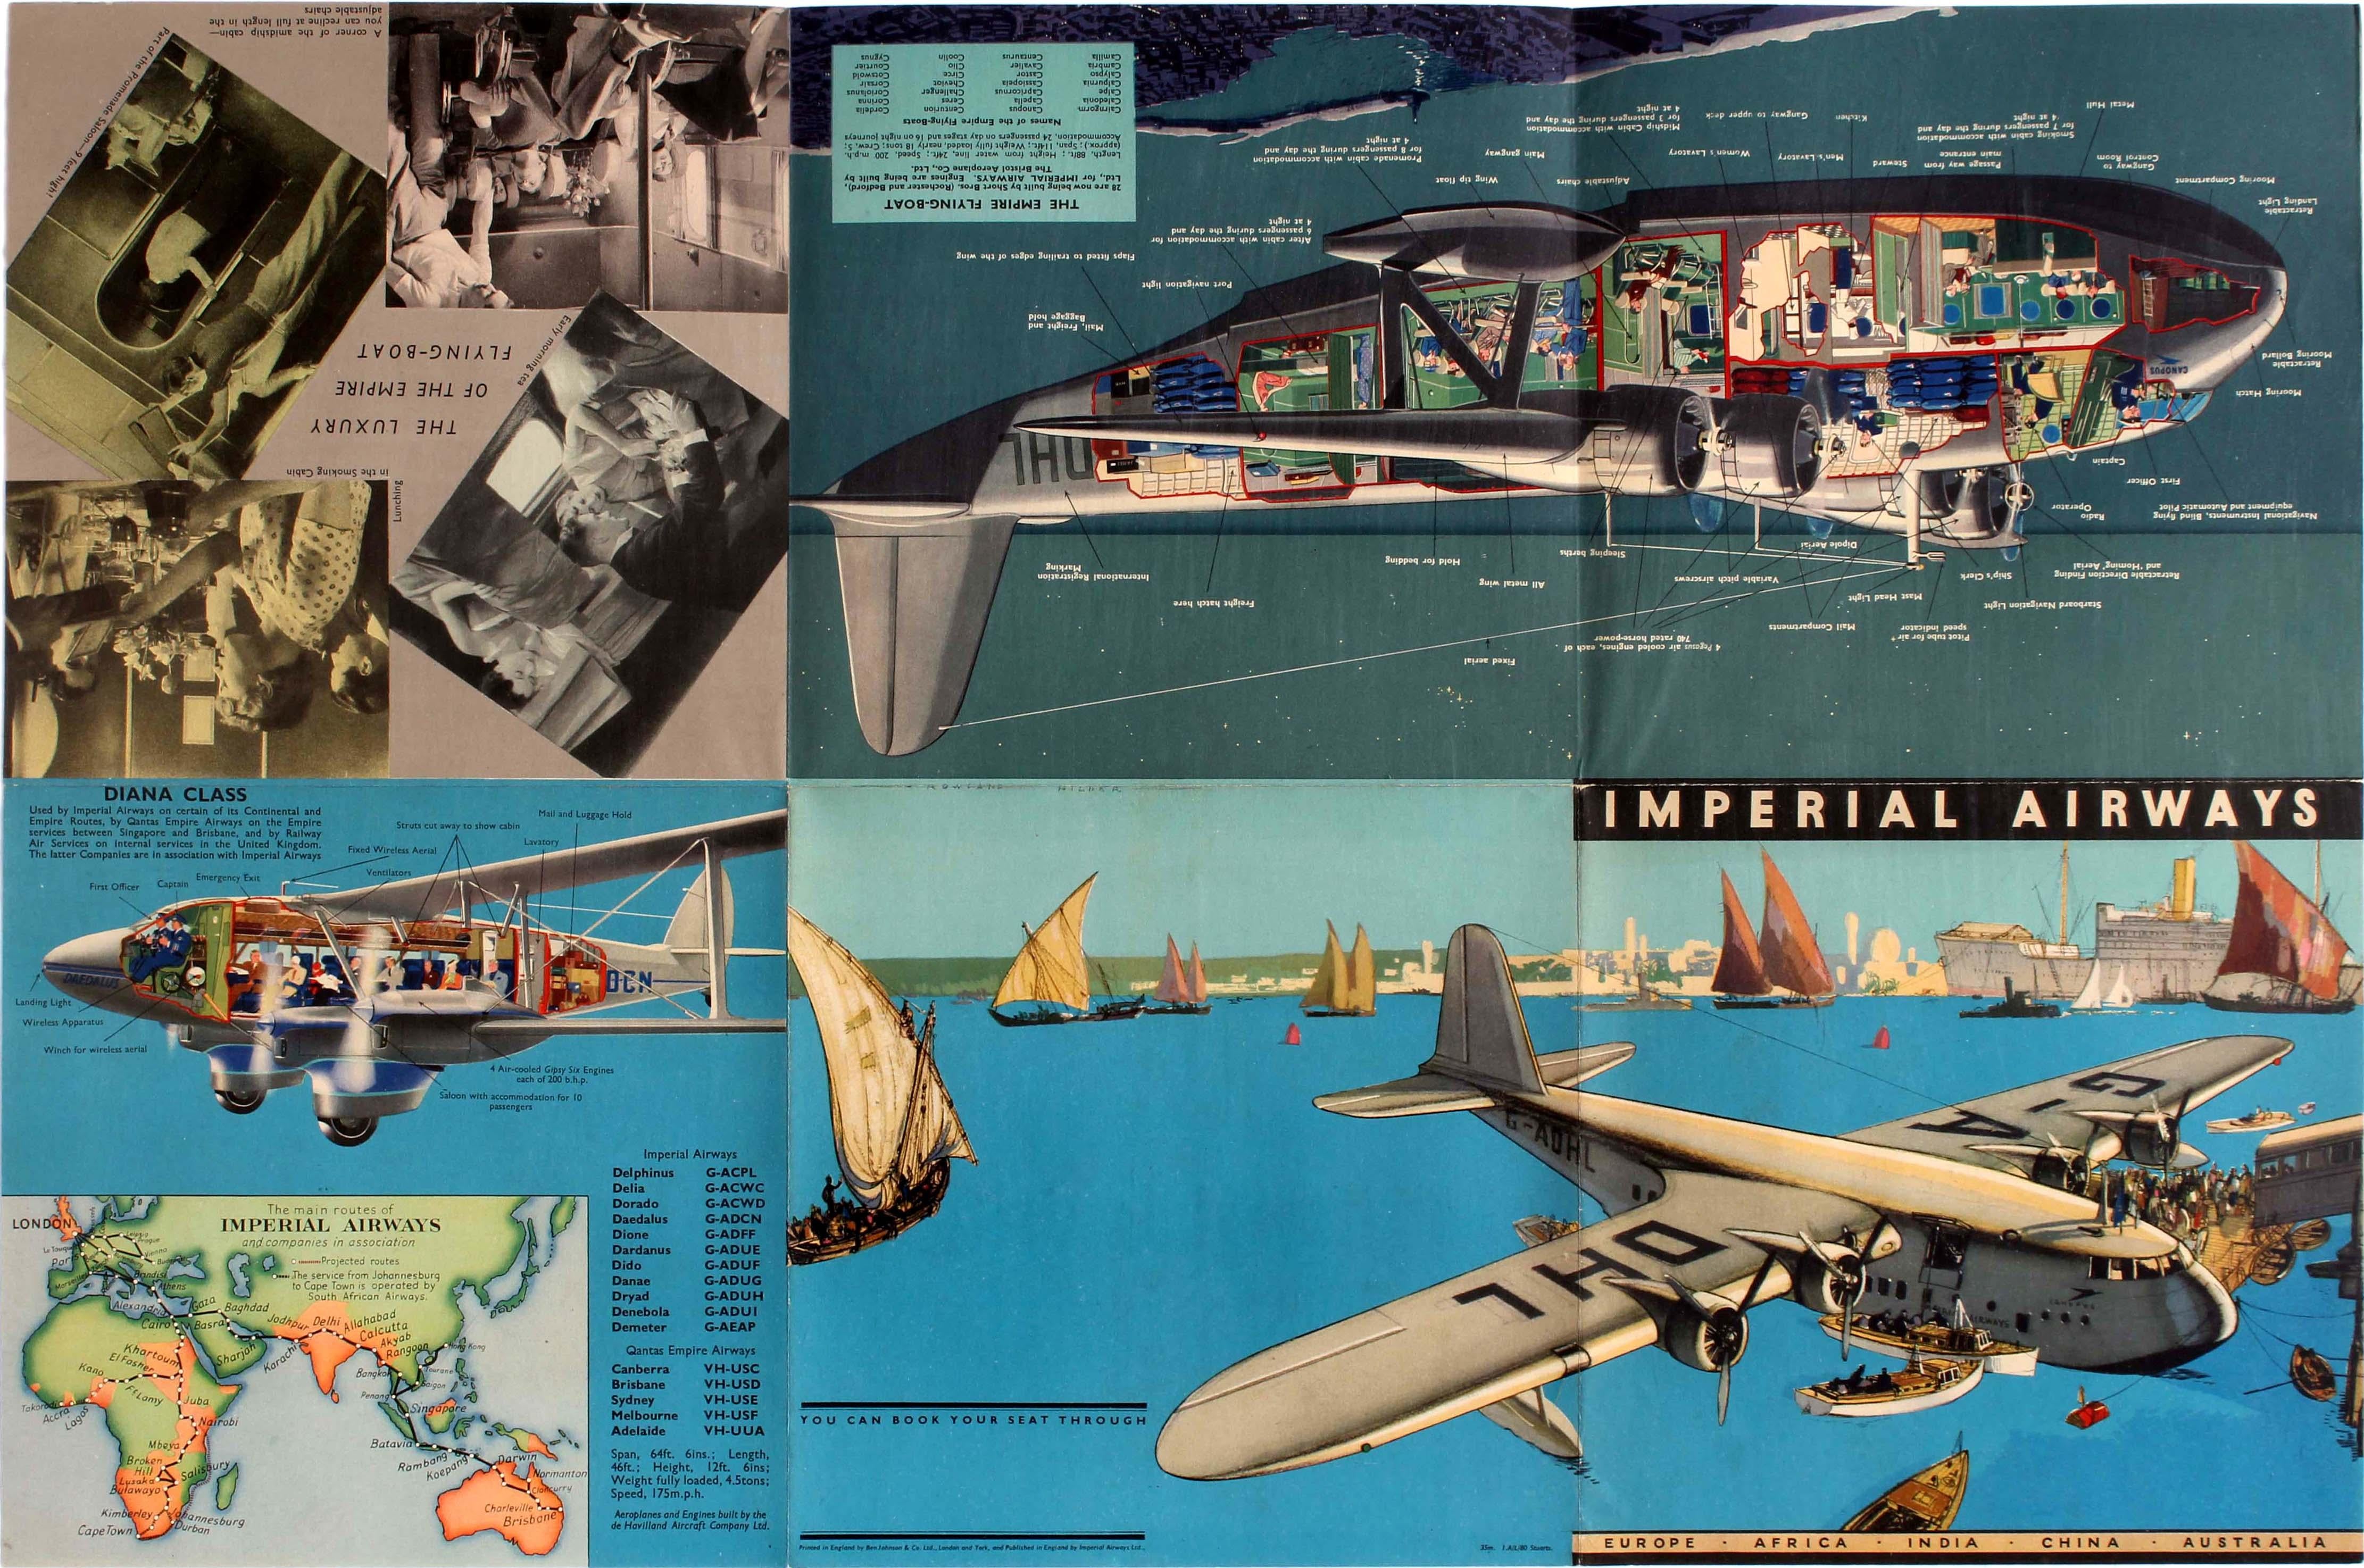 Original vintage double sided travel advertising chromolithograph brochure poster published by Imperial Airways The Greatest Air Service in the World featuring fantastic artwork on the cover side depicting passengers boarding an Empire Flying Boat